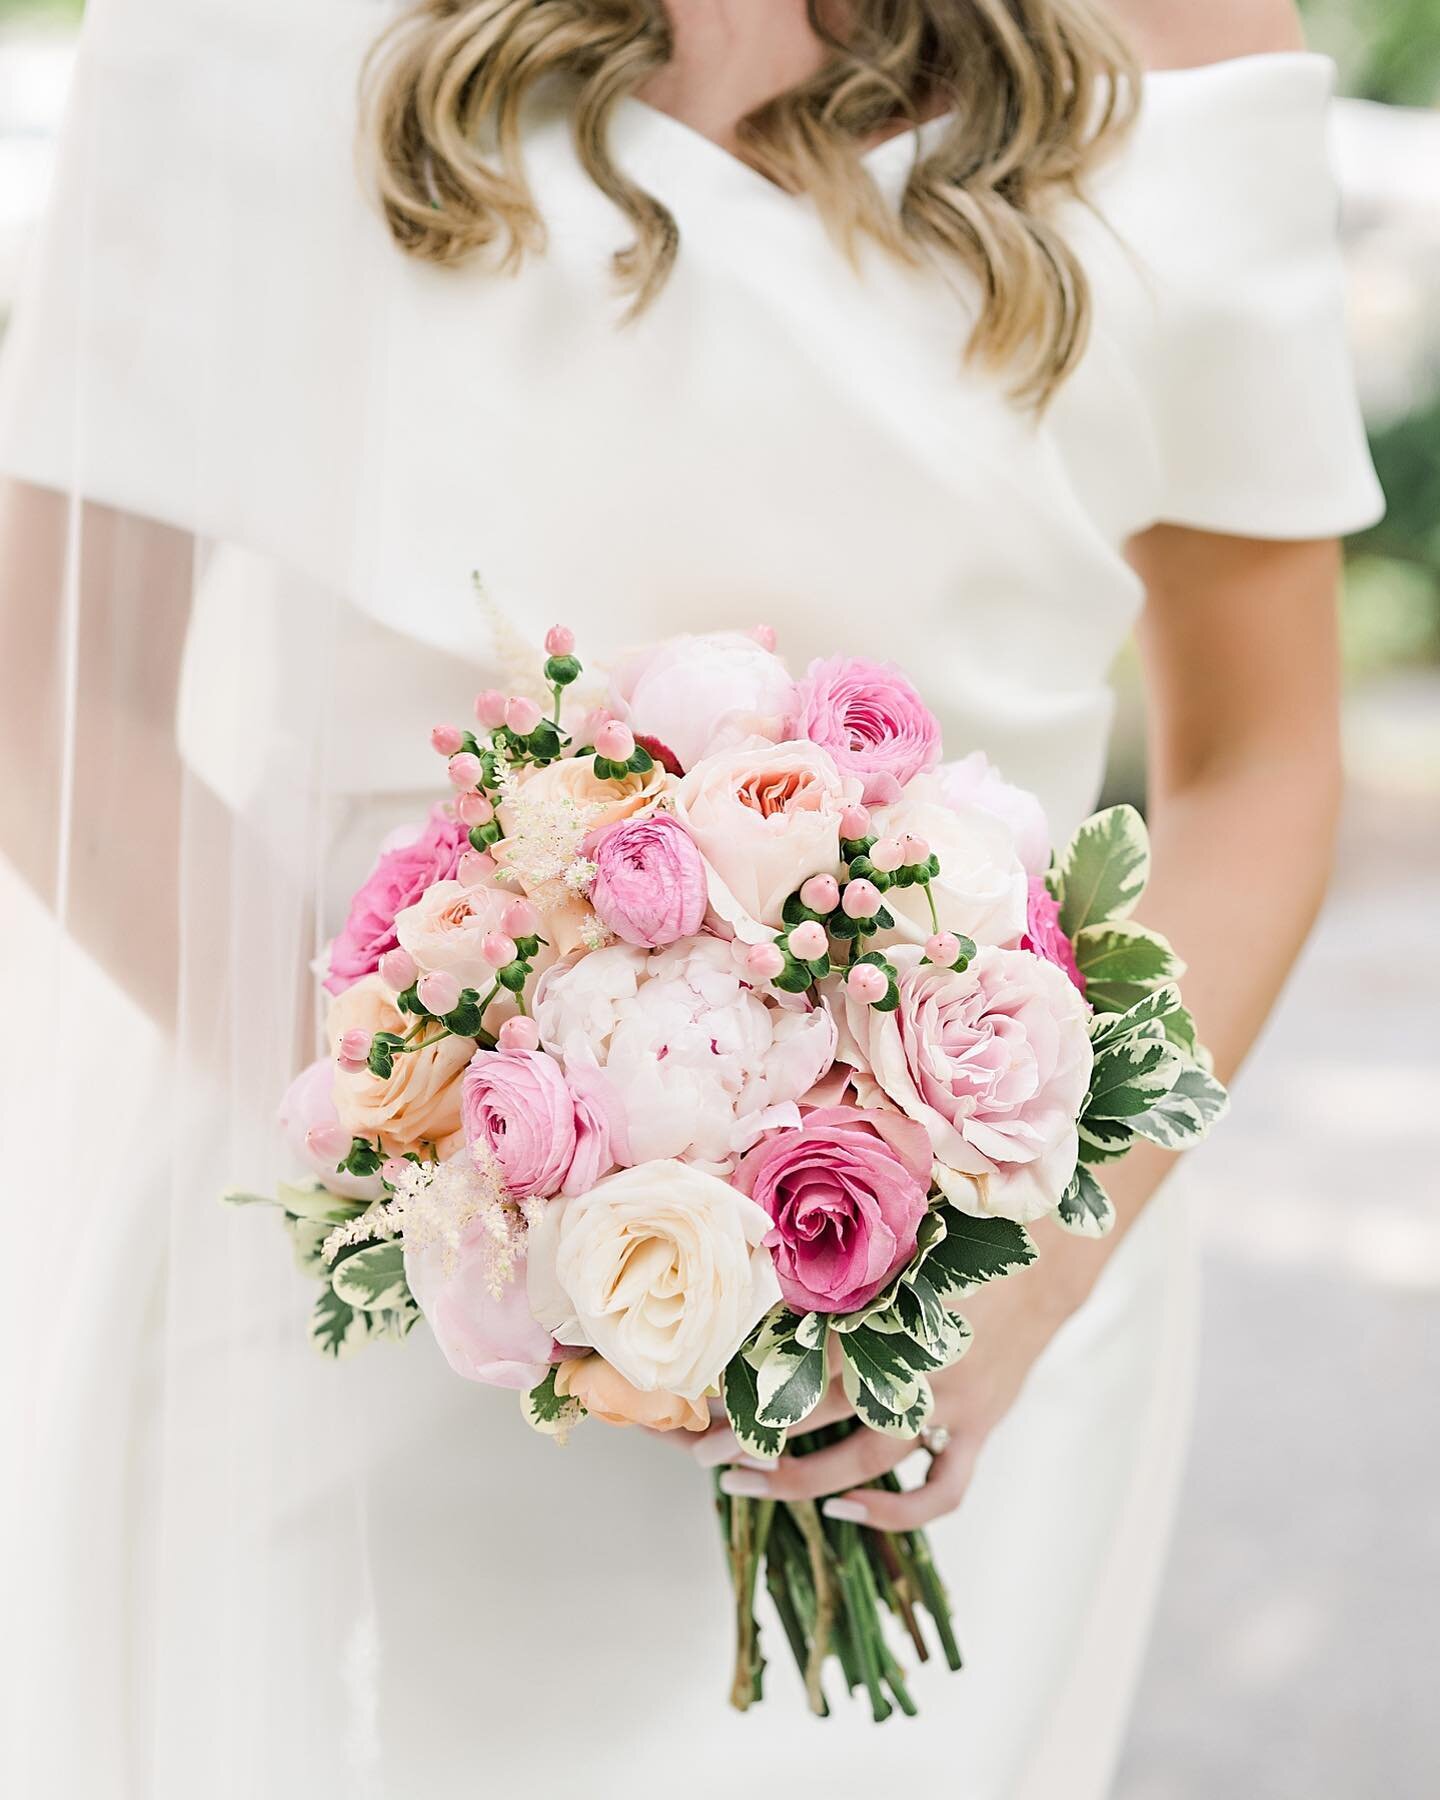 I love a bouquet with color! In another life, I would have loved to have been a florist. Maybe one day I can convince someone to teach me their ways. #alabamaweddingflorals #colorfulbridalbouquet #pinkbridalbouquet #weddingflowers